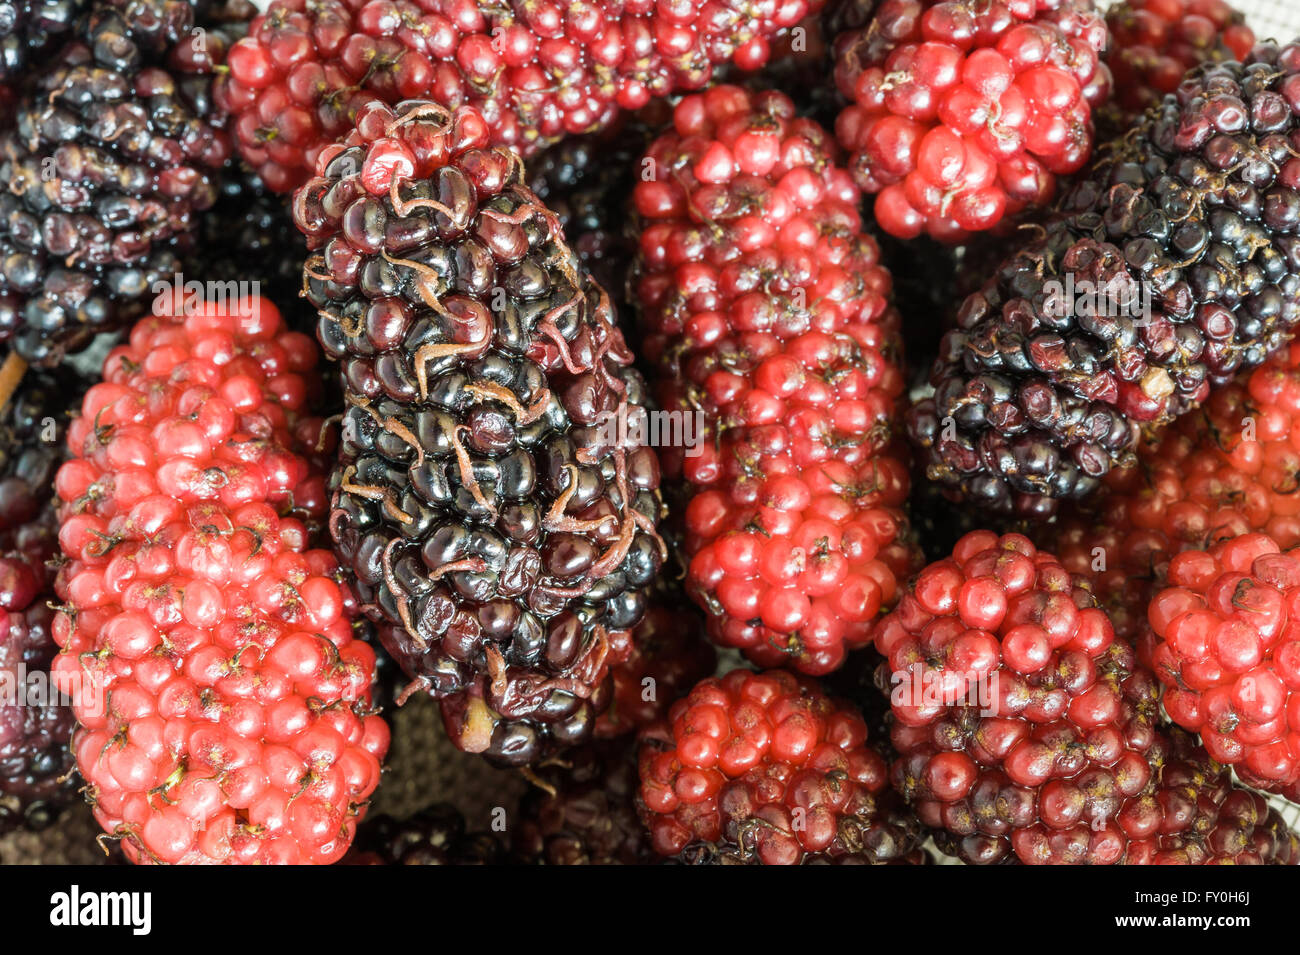 Close up of delicious red and black boysenberries. Stock Photo